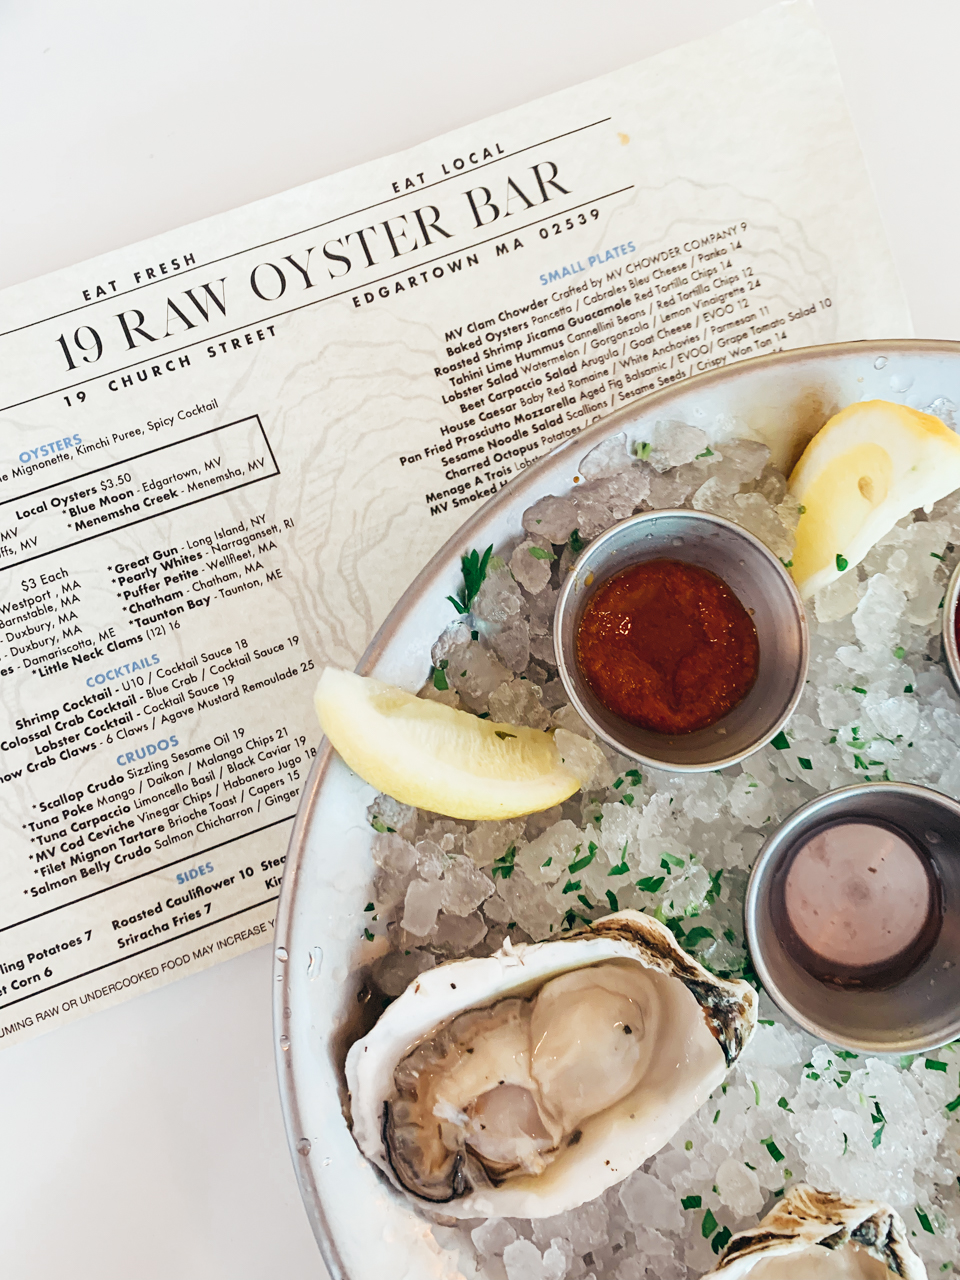 19 Raw Oyster Bar | New England Foodie Guide: Top 8 Restaurants in Martha's Vineyard You Must Try by popular New England Food Blogger, Shannon Shipman: image of a plate of oysters at 19 Raw Oyster Bar.